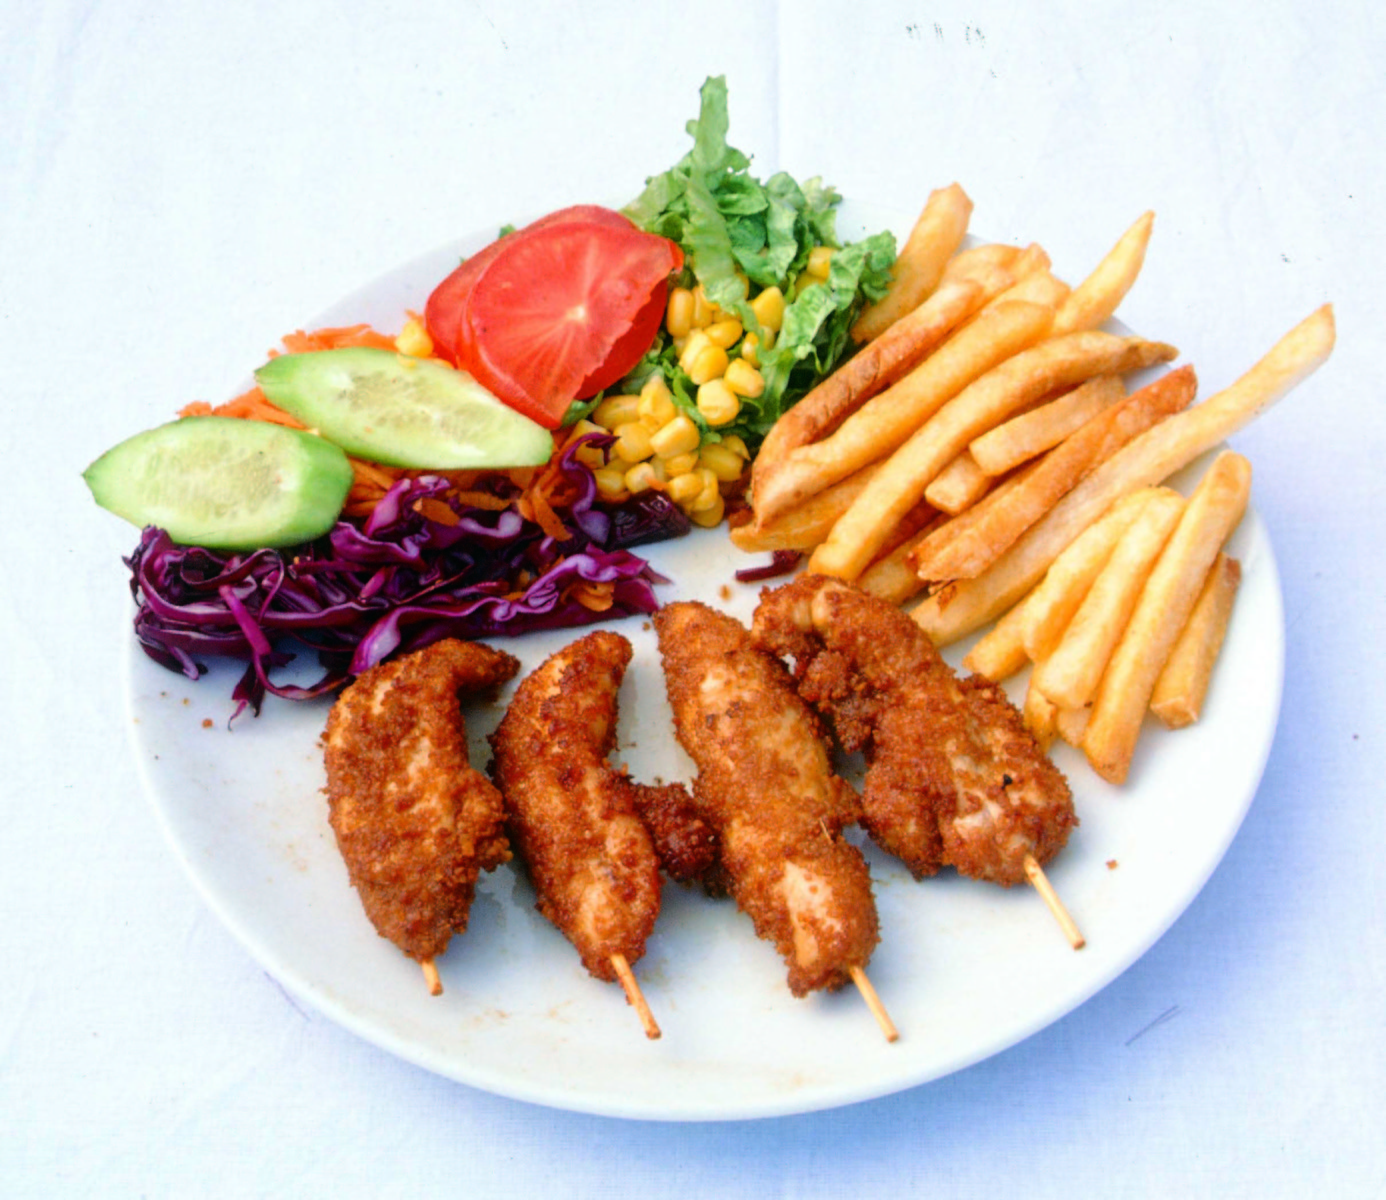 fried fish and french fries on a plate